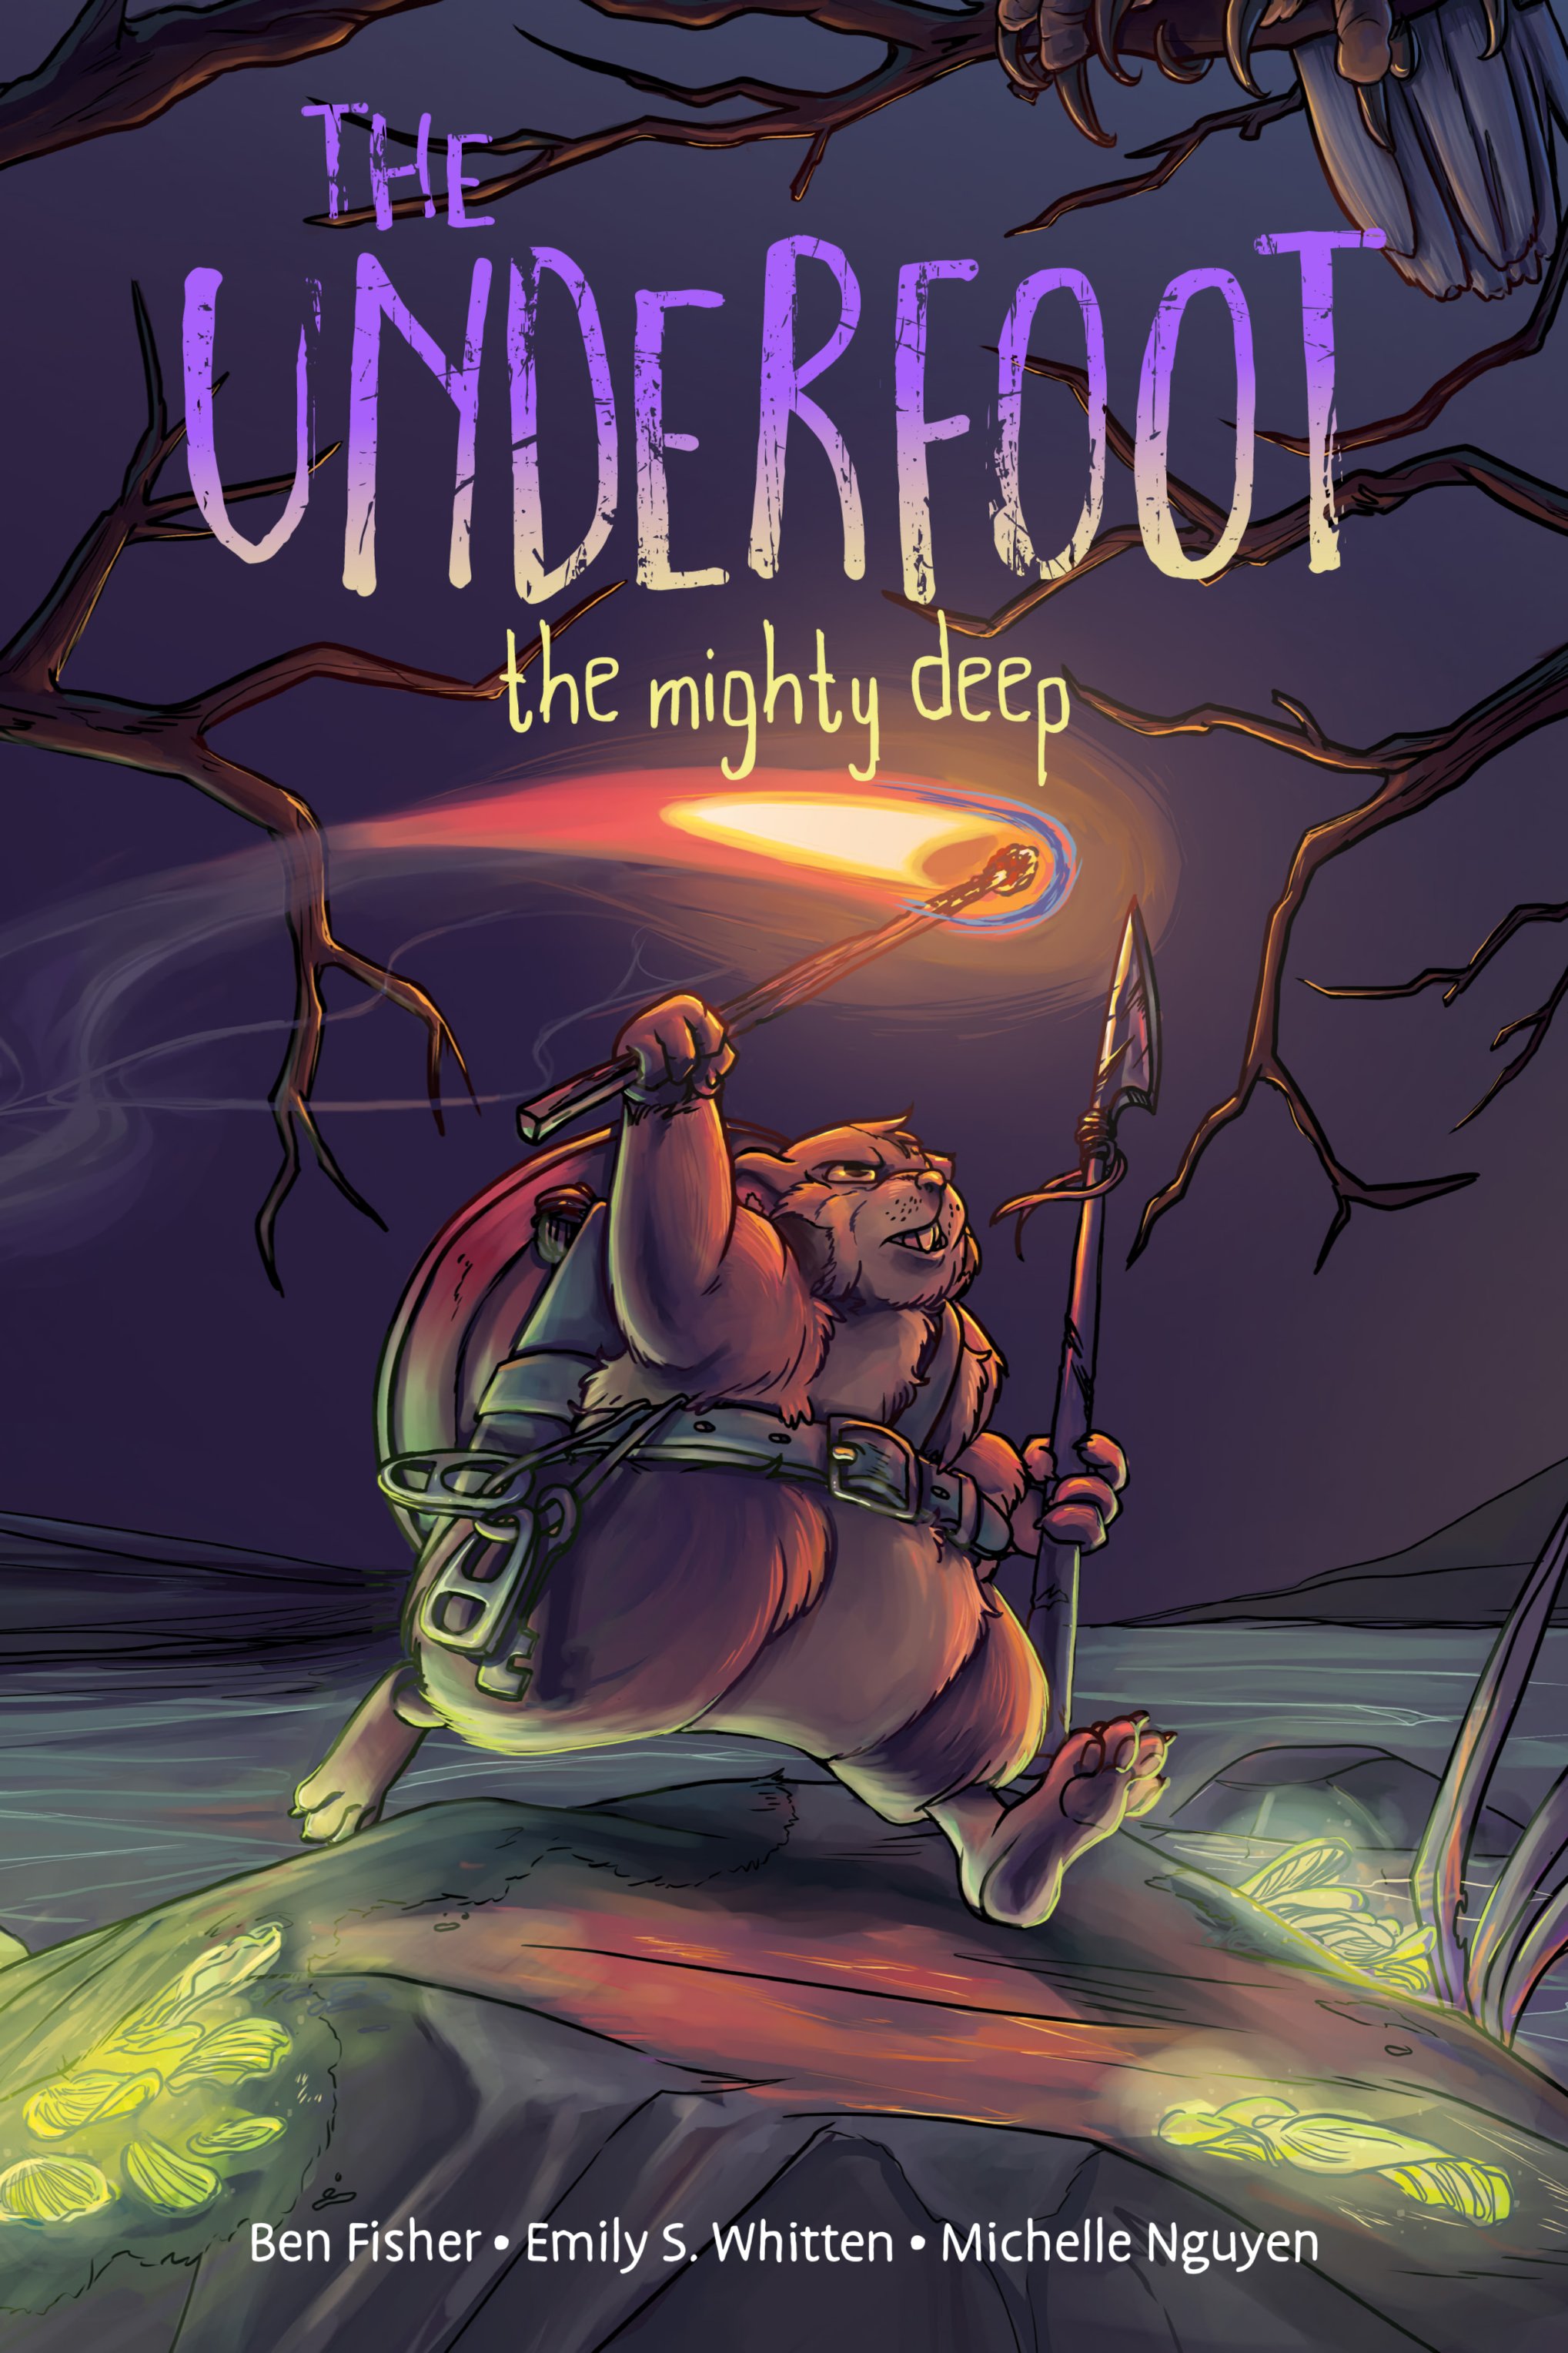 Read online The Underfoot comic -  Issue # TPB 1 (Part 1) - 1